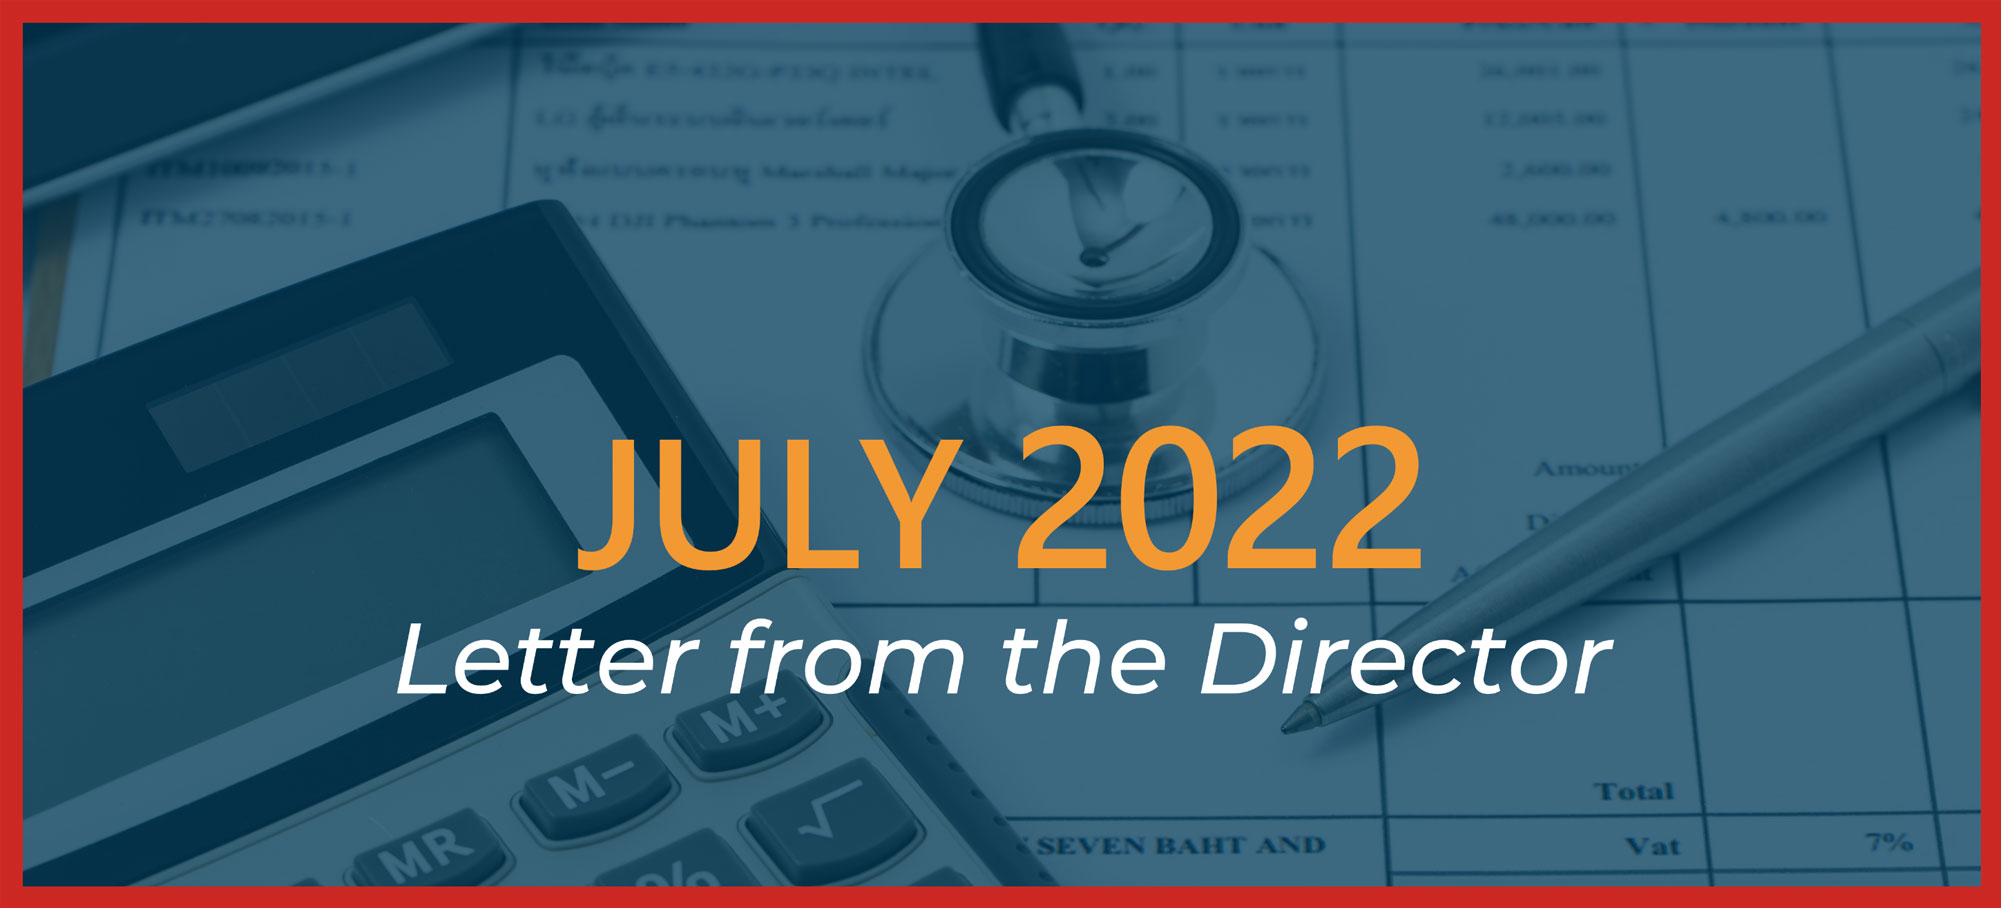 July 2022 - Letter from the Director